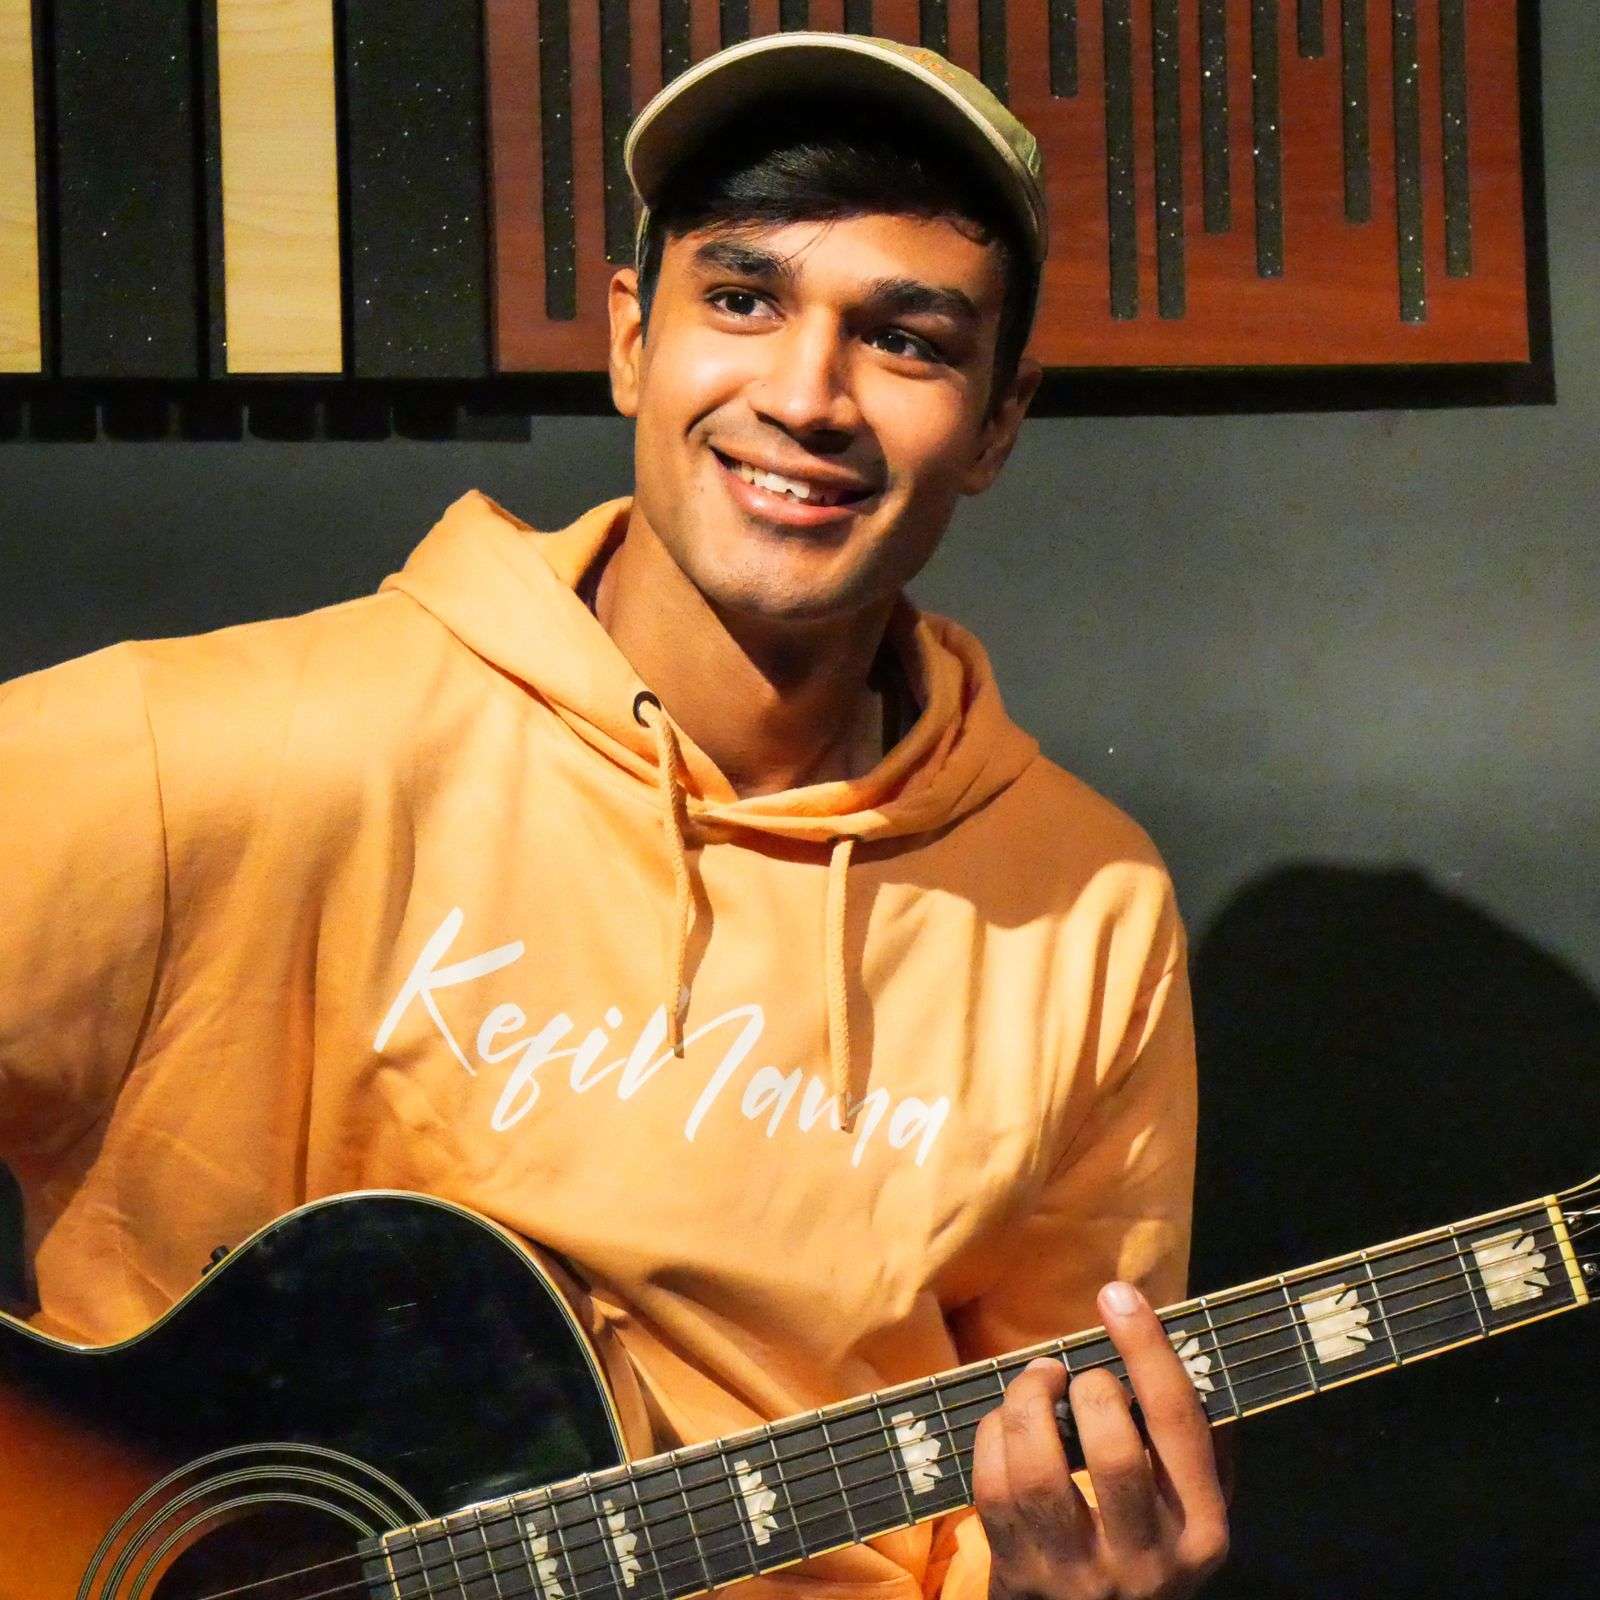 Looking back at his childhood, Kefinama shares the building blocks that made him a musician today.